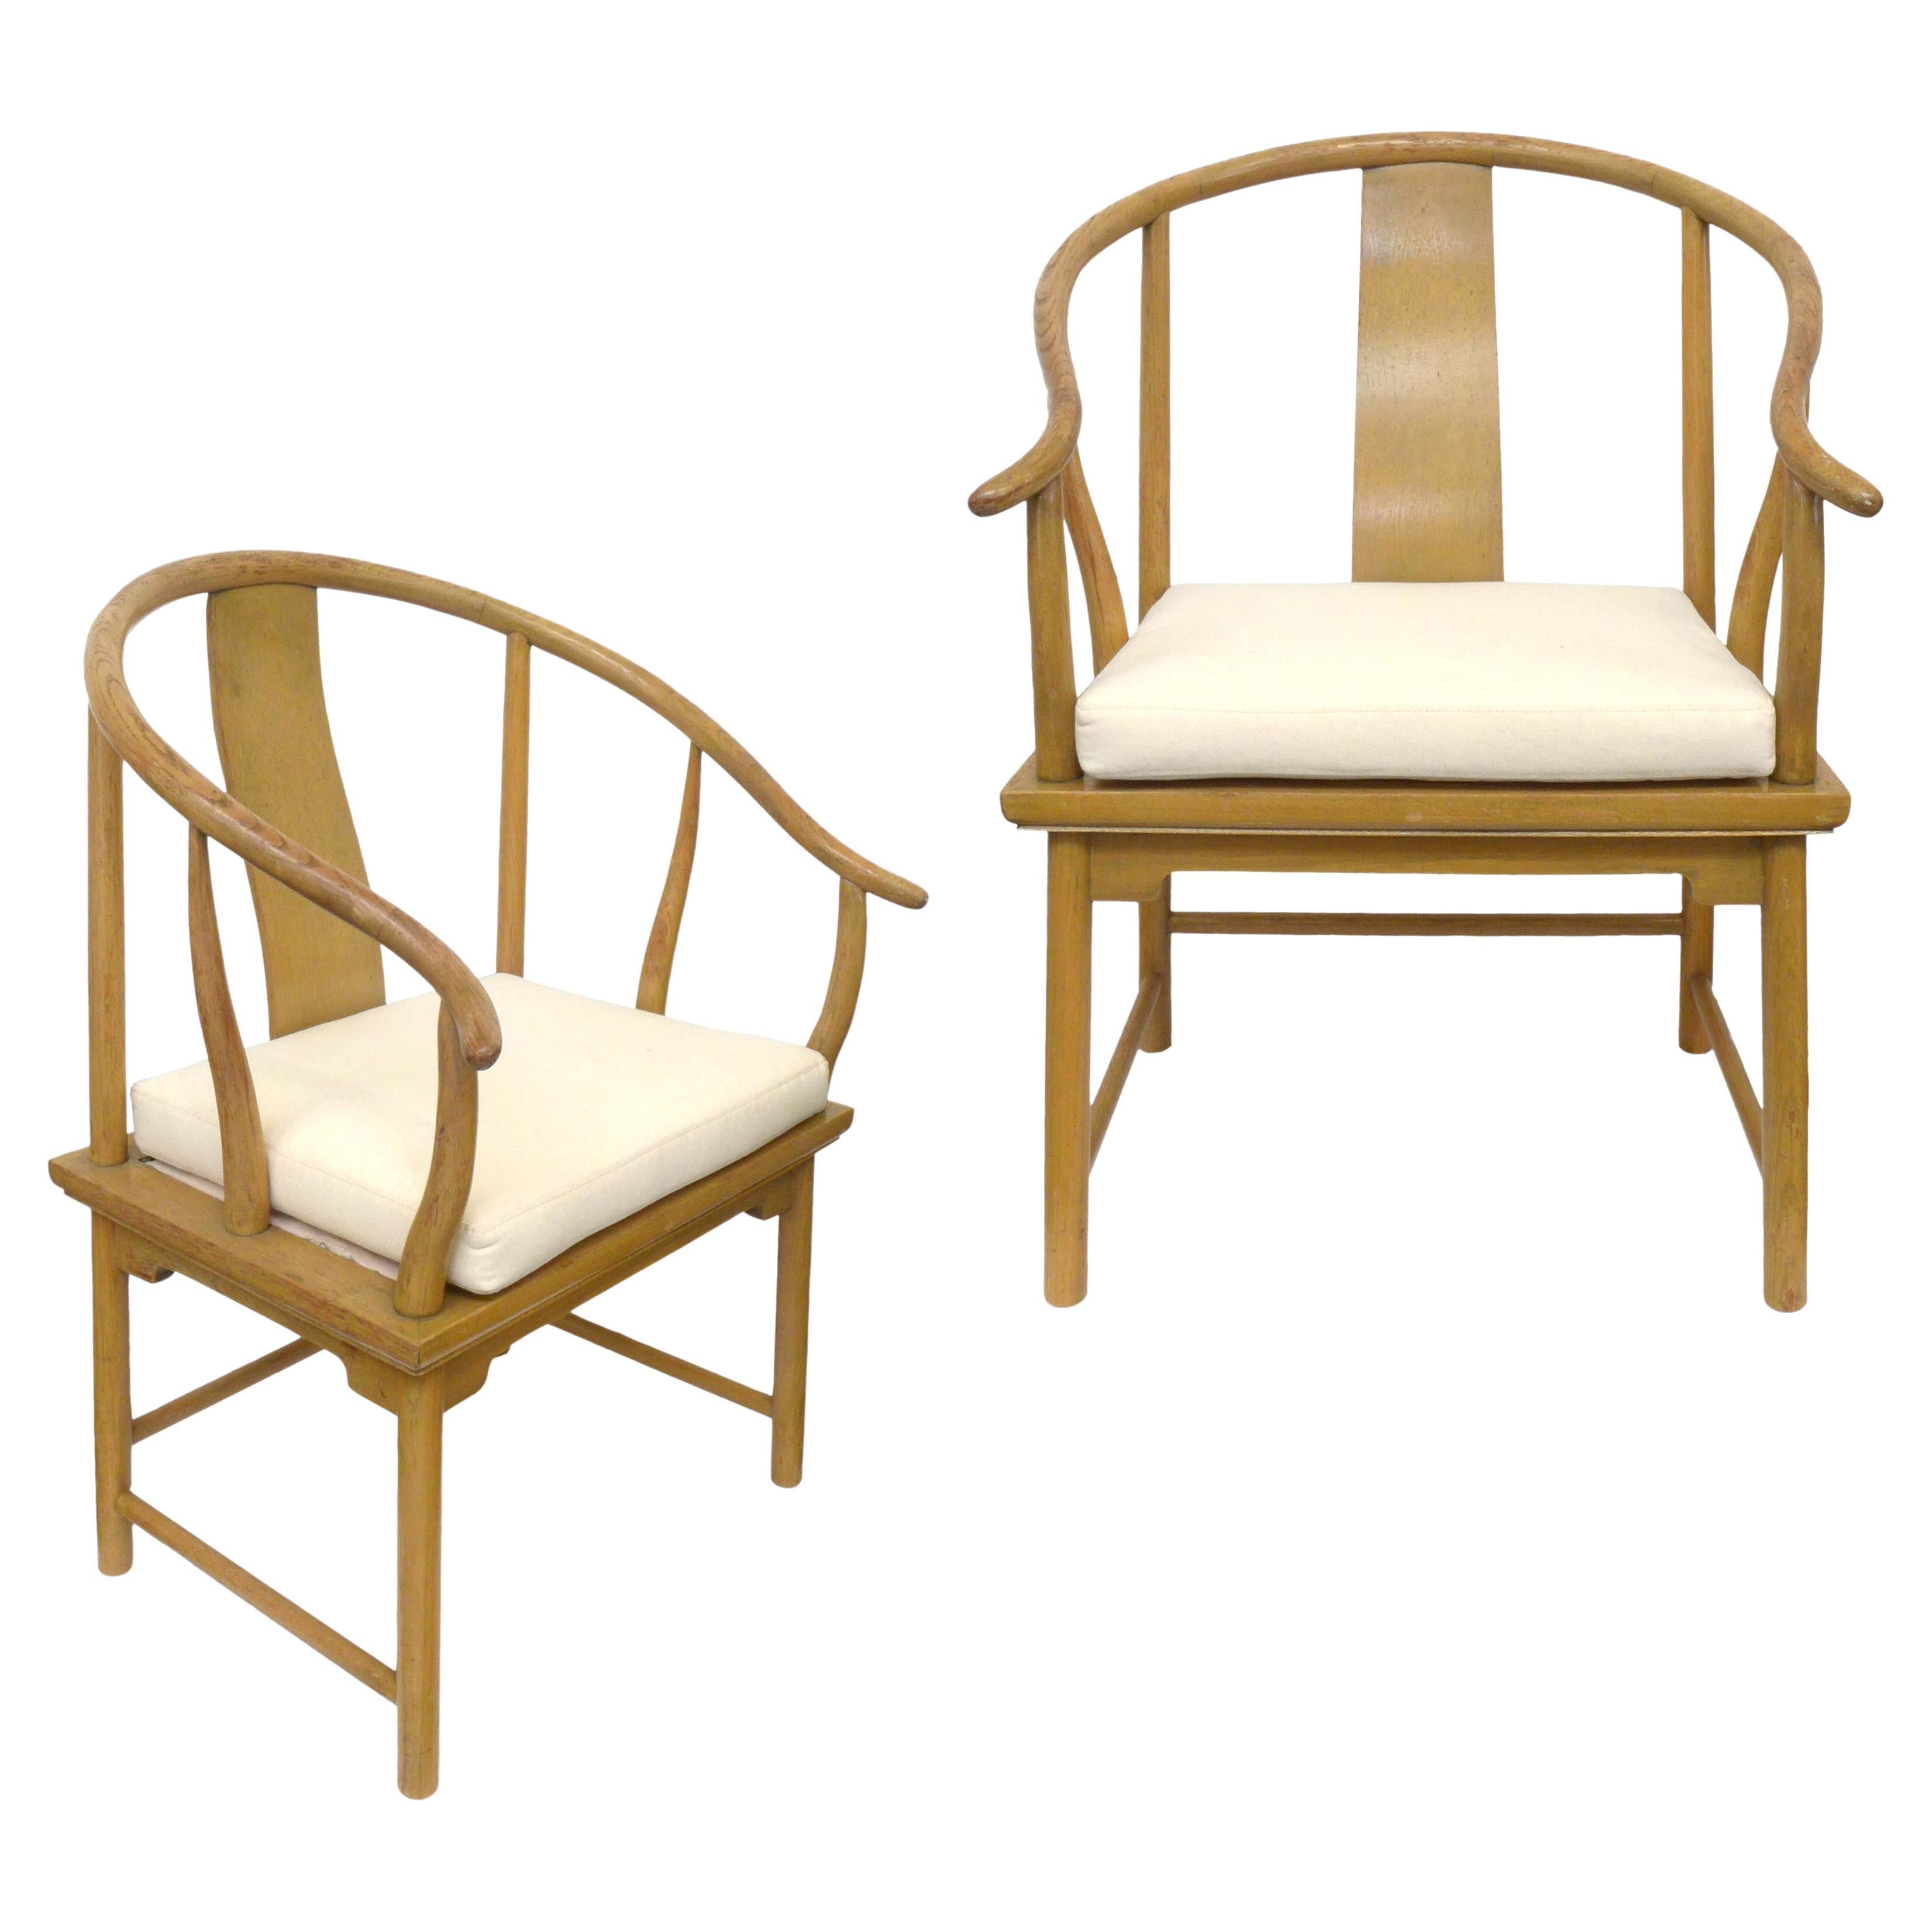 Pair of Blonde Wood Curvilinear Arm Chairs